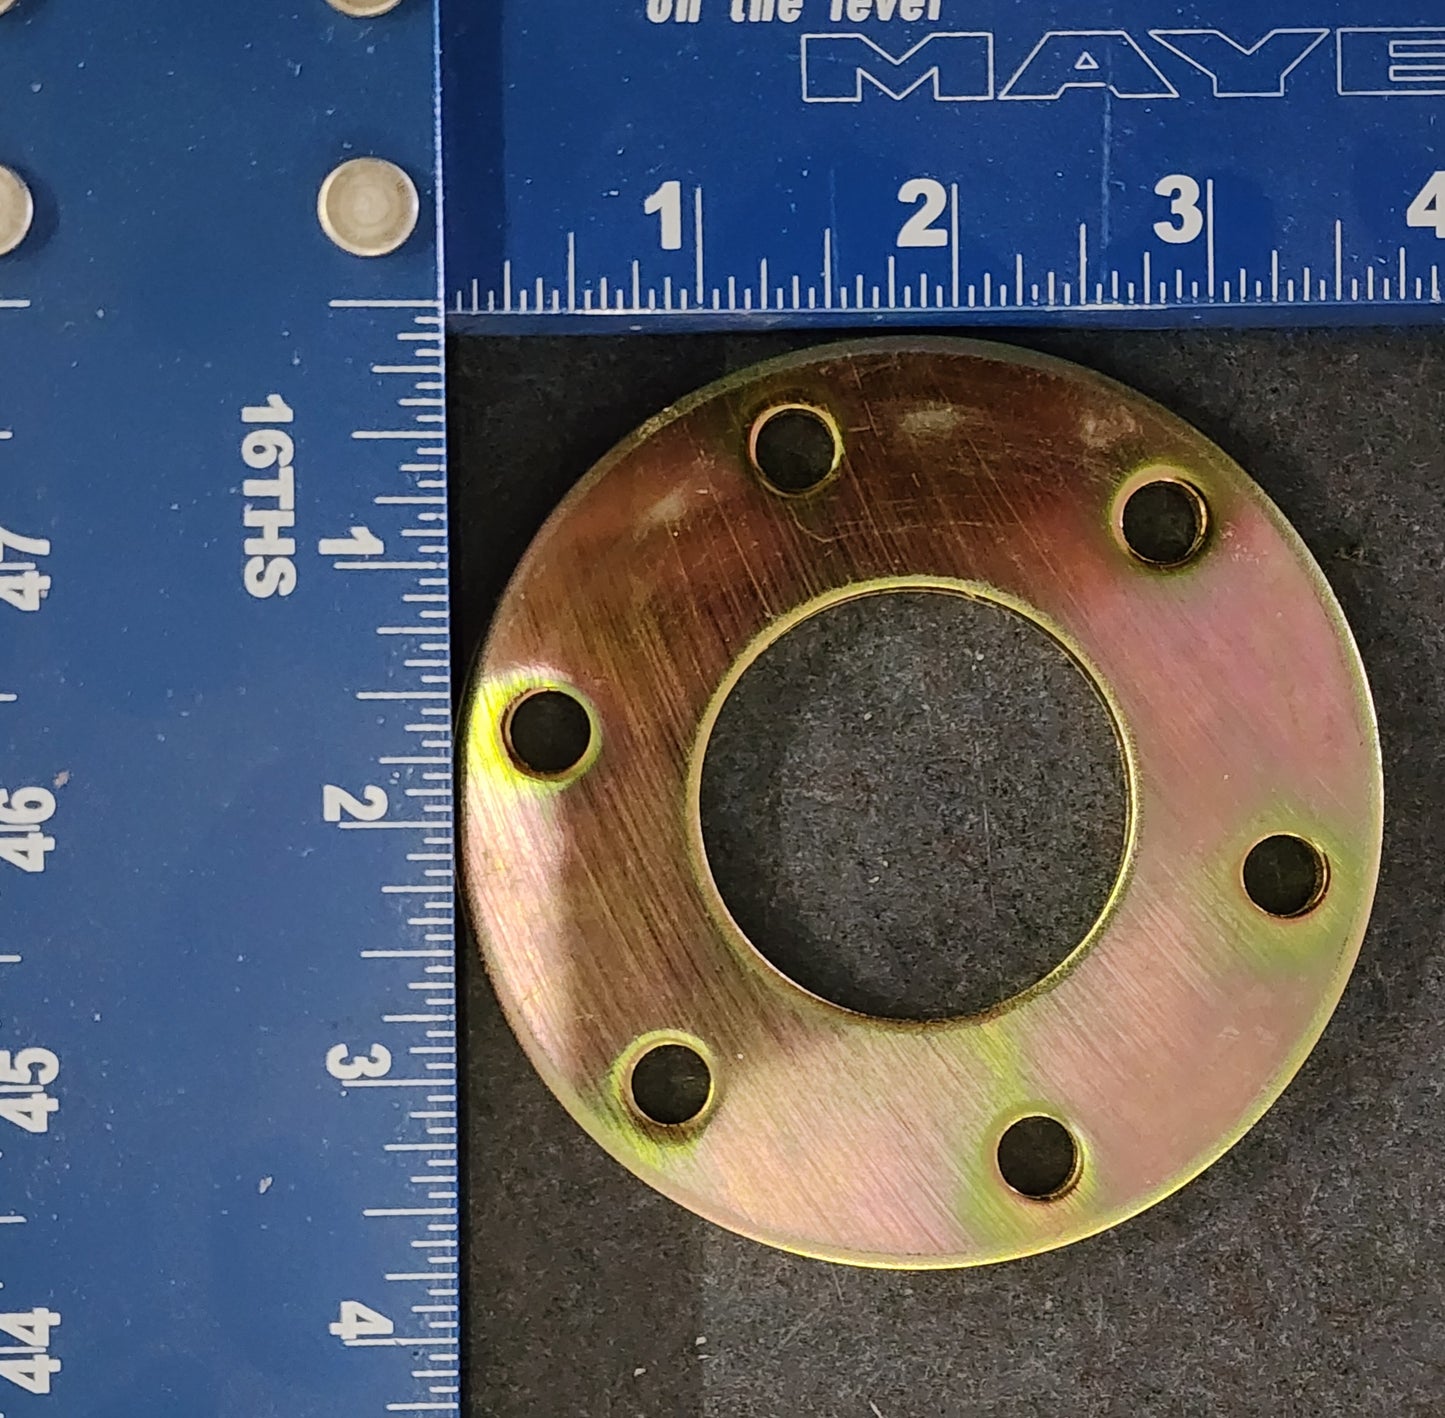 SNR070 Bearing Retainer Plates.